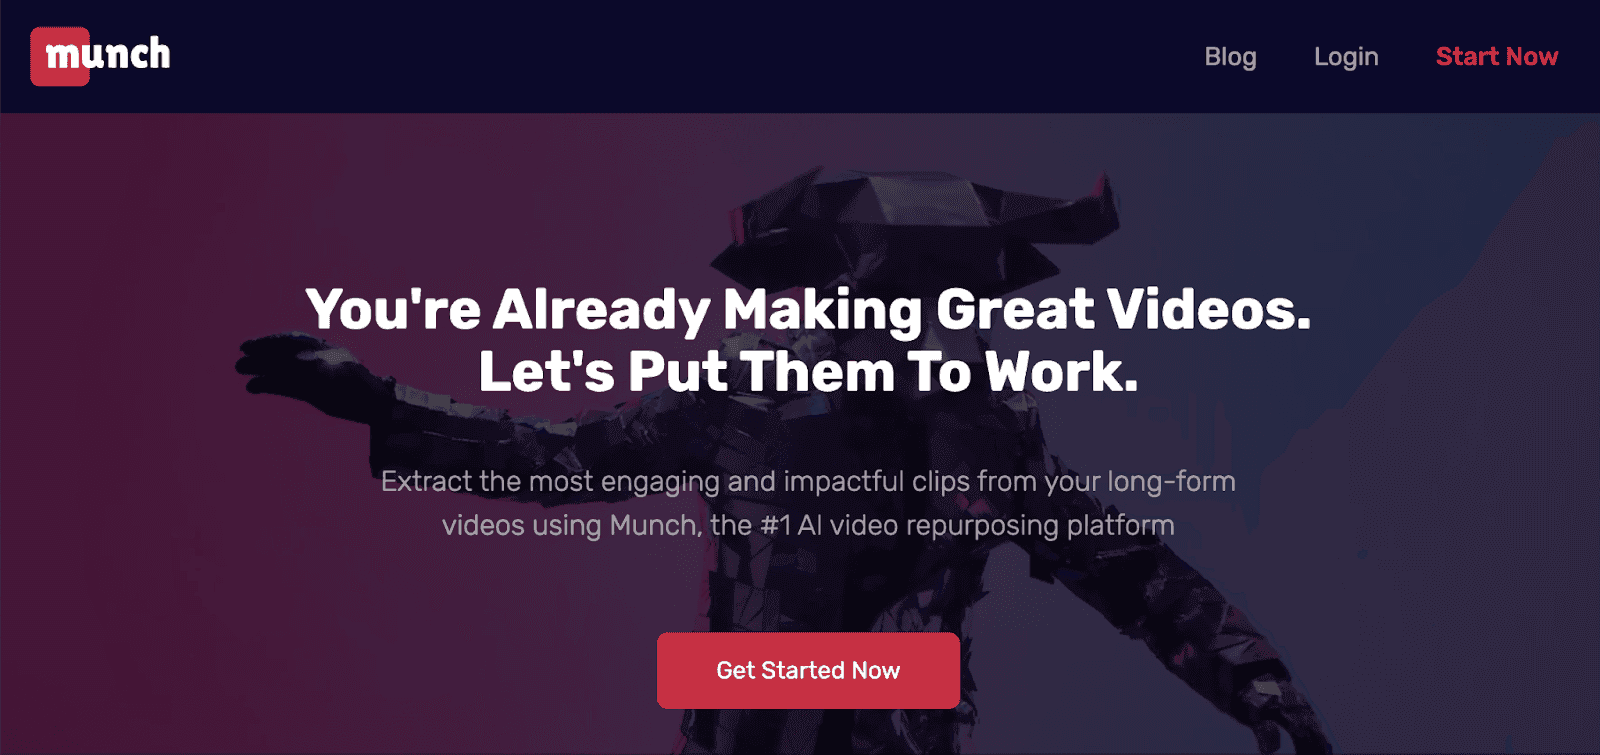 Munch webpage - You're already making great videos. Let's put them to work